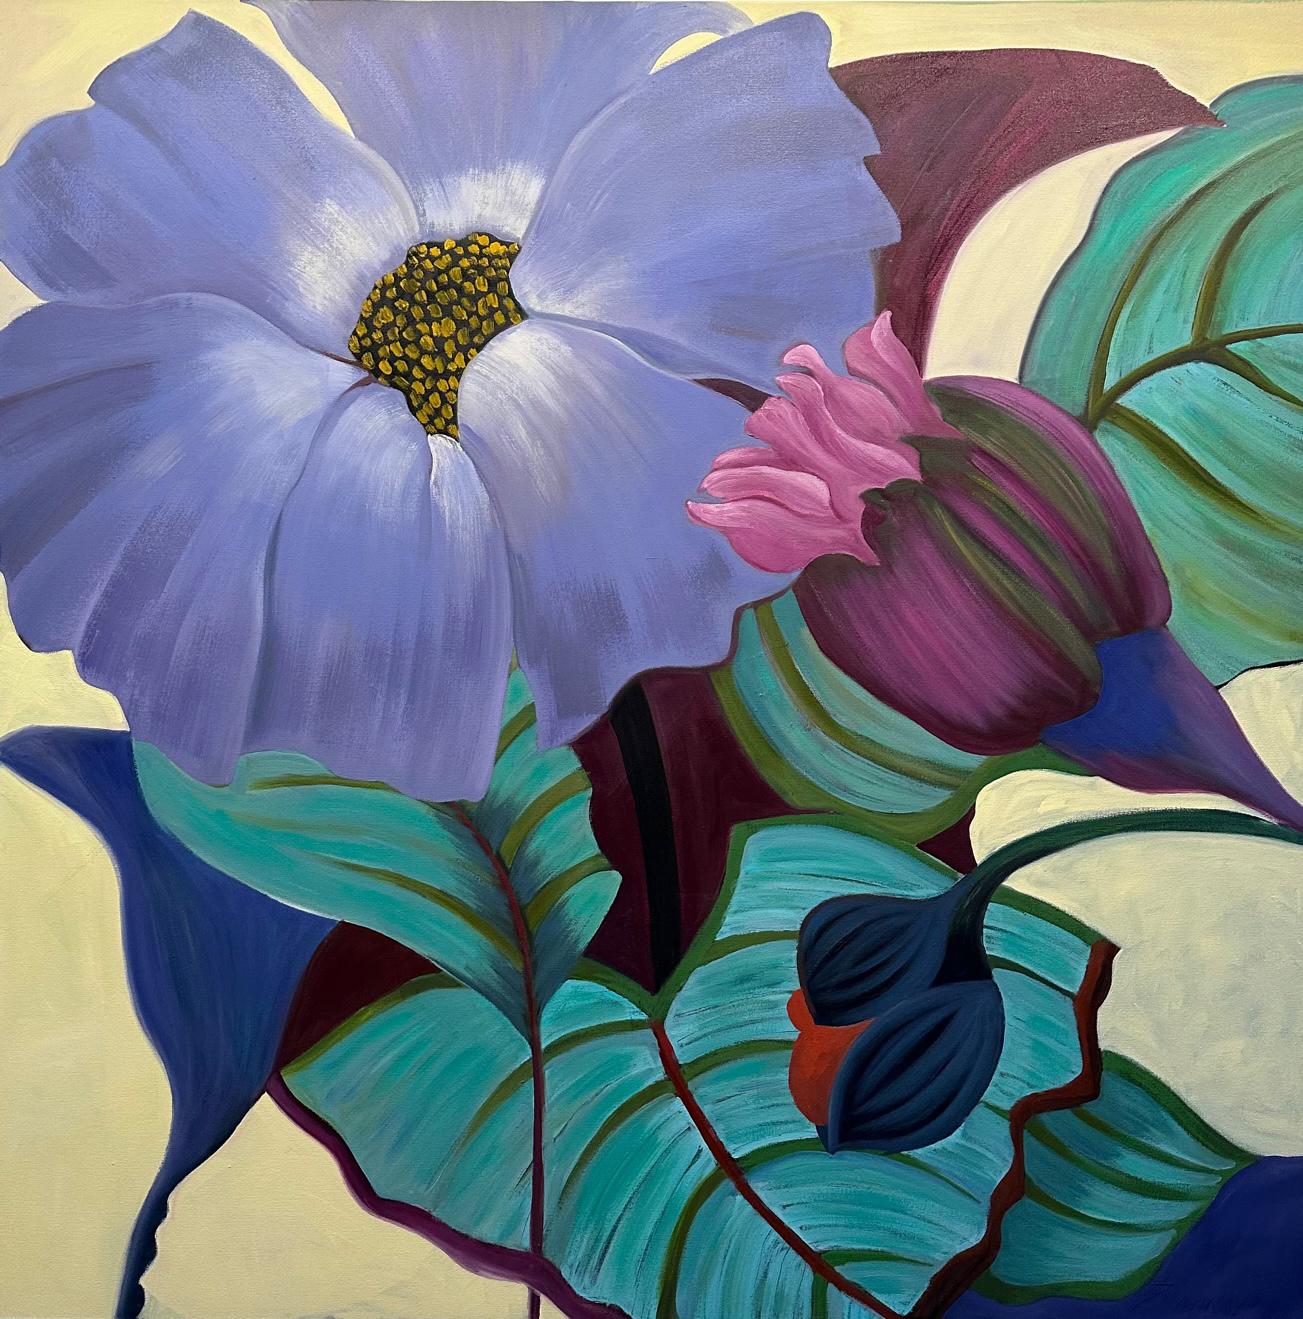 This masterpiece is exhibited in the Zimmerman Gallery, Carmel CA.

Marc Zimmerman creates playful paintings, whether deep mysterious jungle or delightfully whimsical florals. His color palette explores various harmonies yet always surprises with